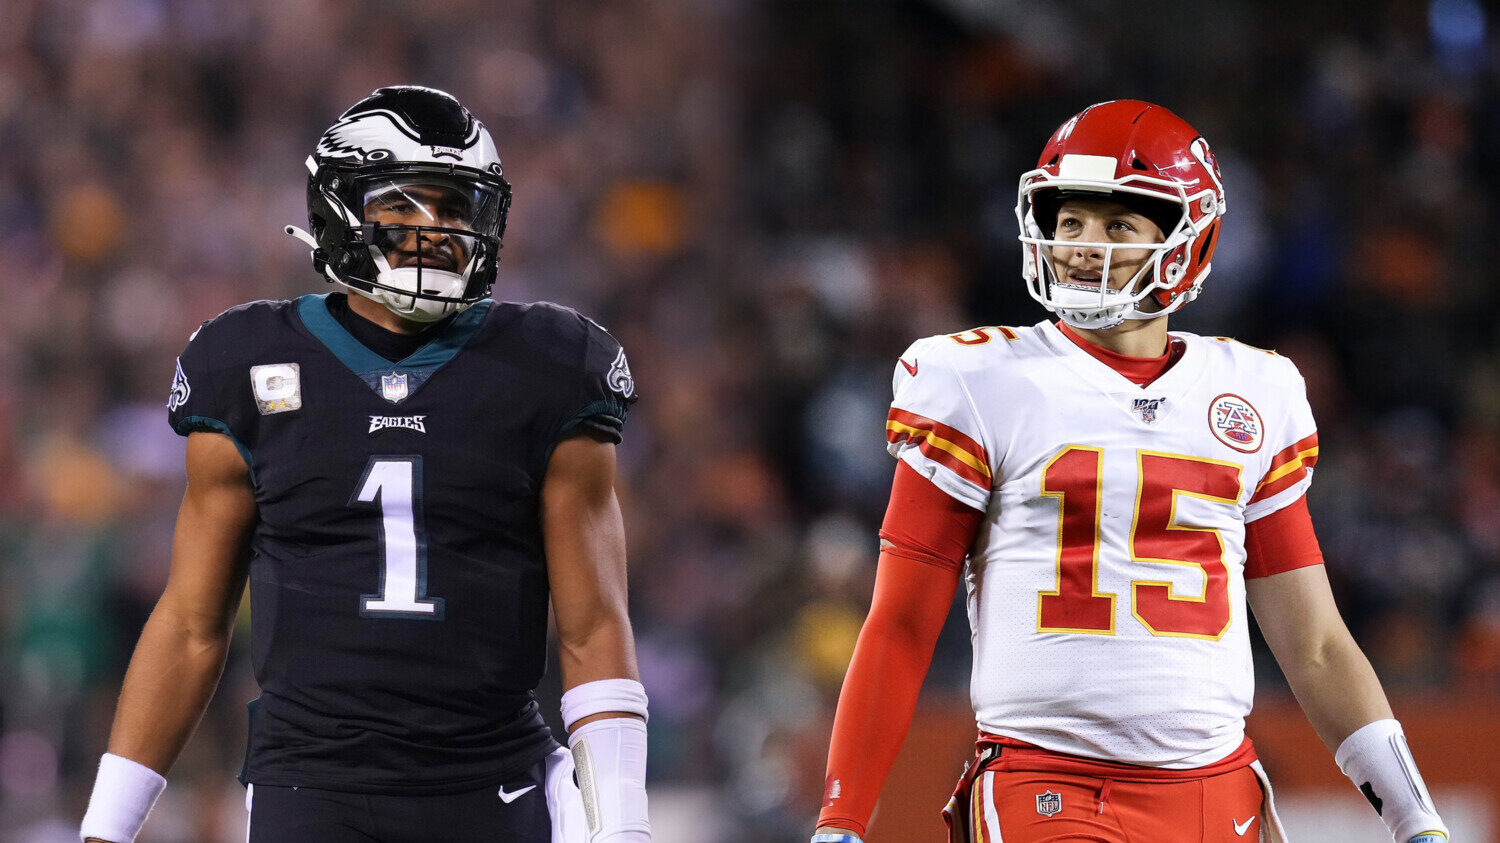 Chiefs-Eagles Super Bowl LVII: 5 players who could be keys in a